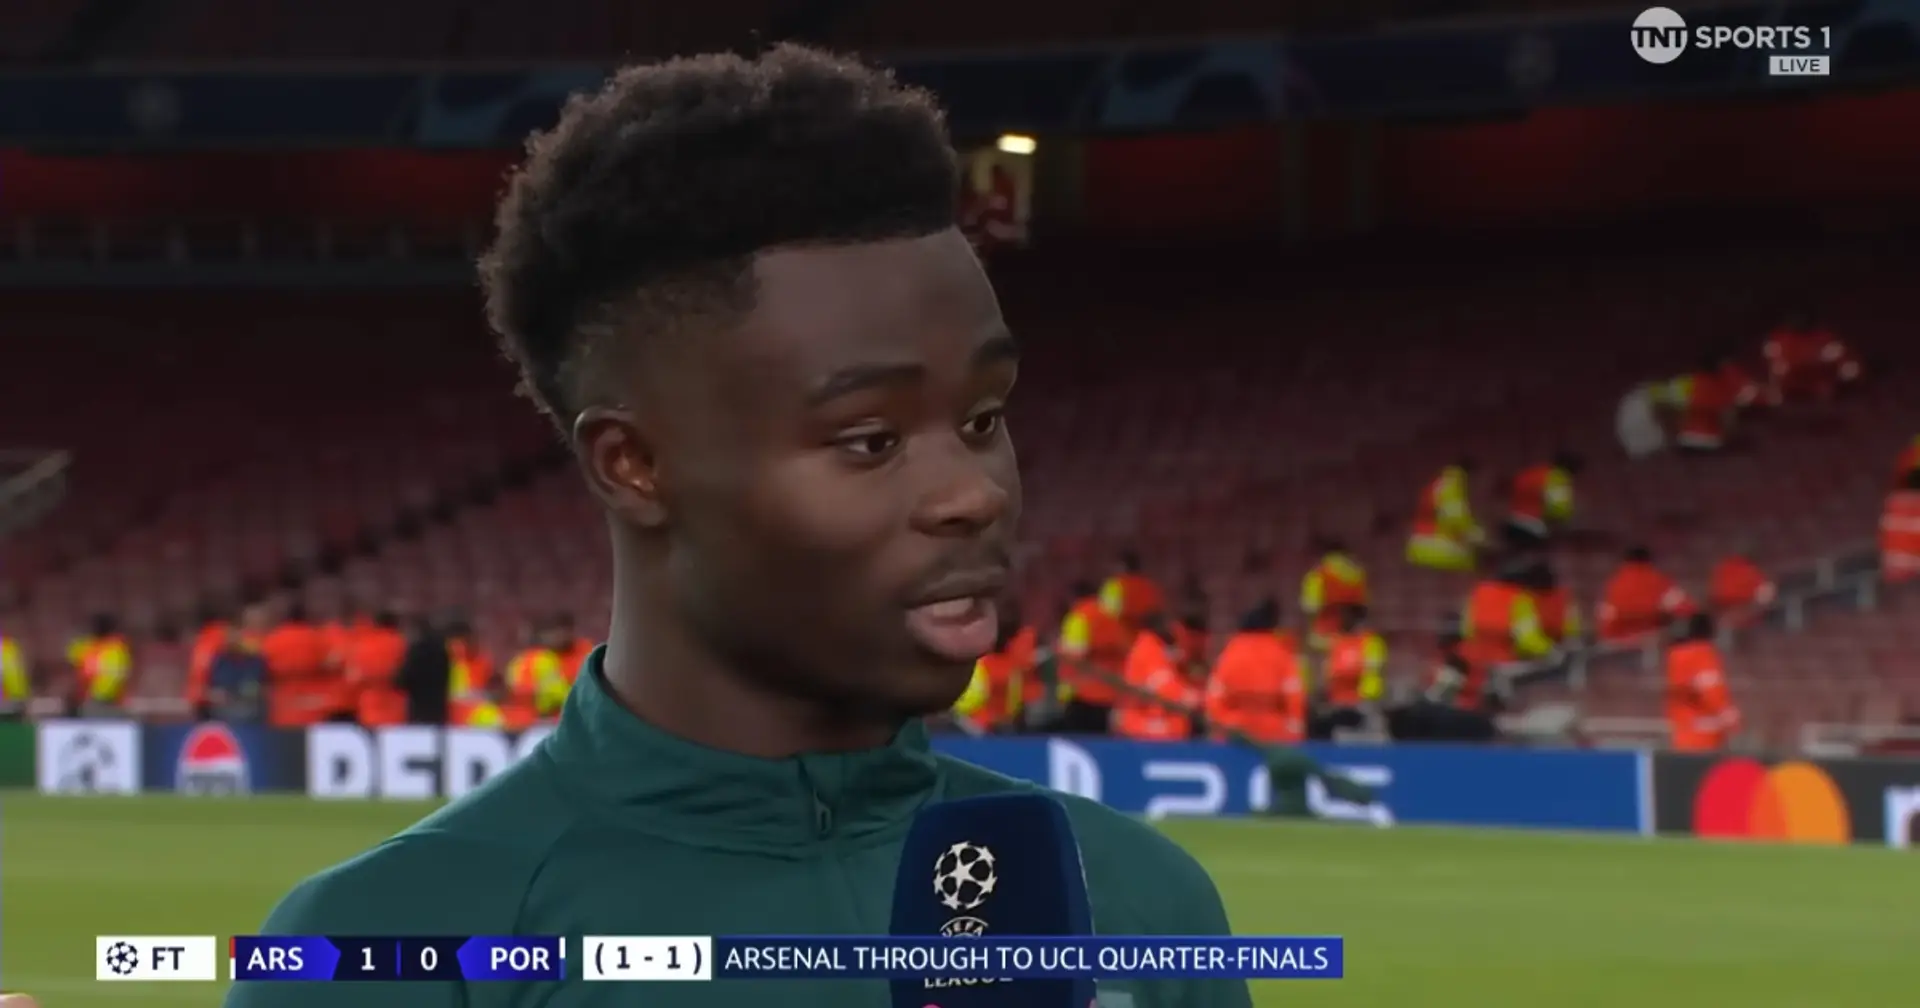 'I was more than ready': Bukayo Saka puts Euro 2020 nightmare behind him with cold Porto penalty